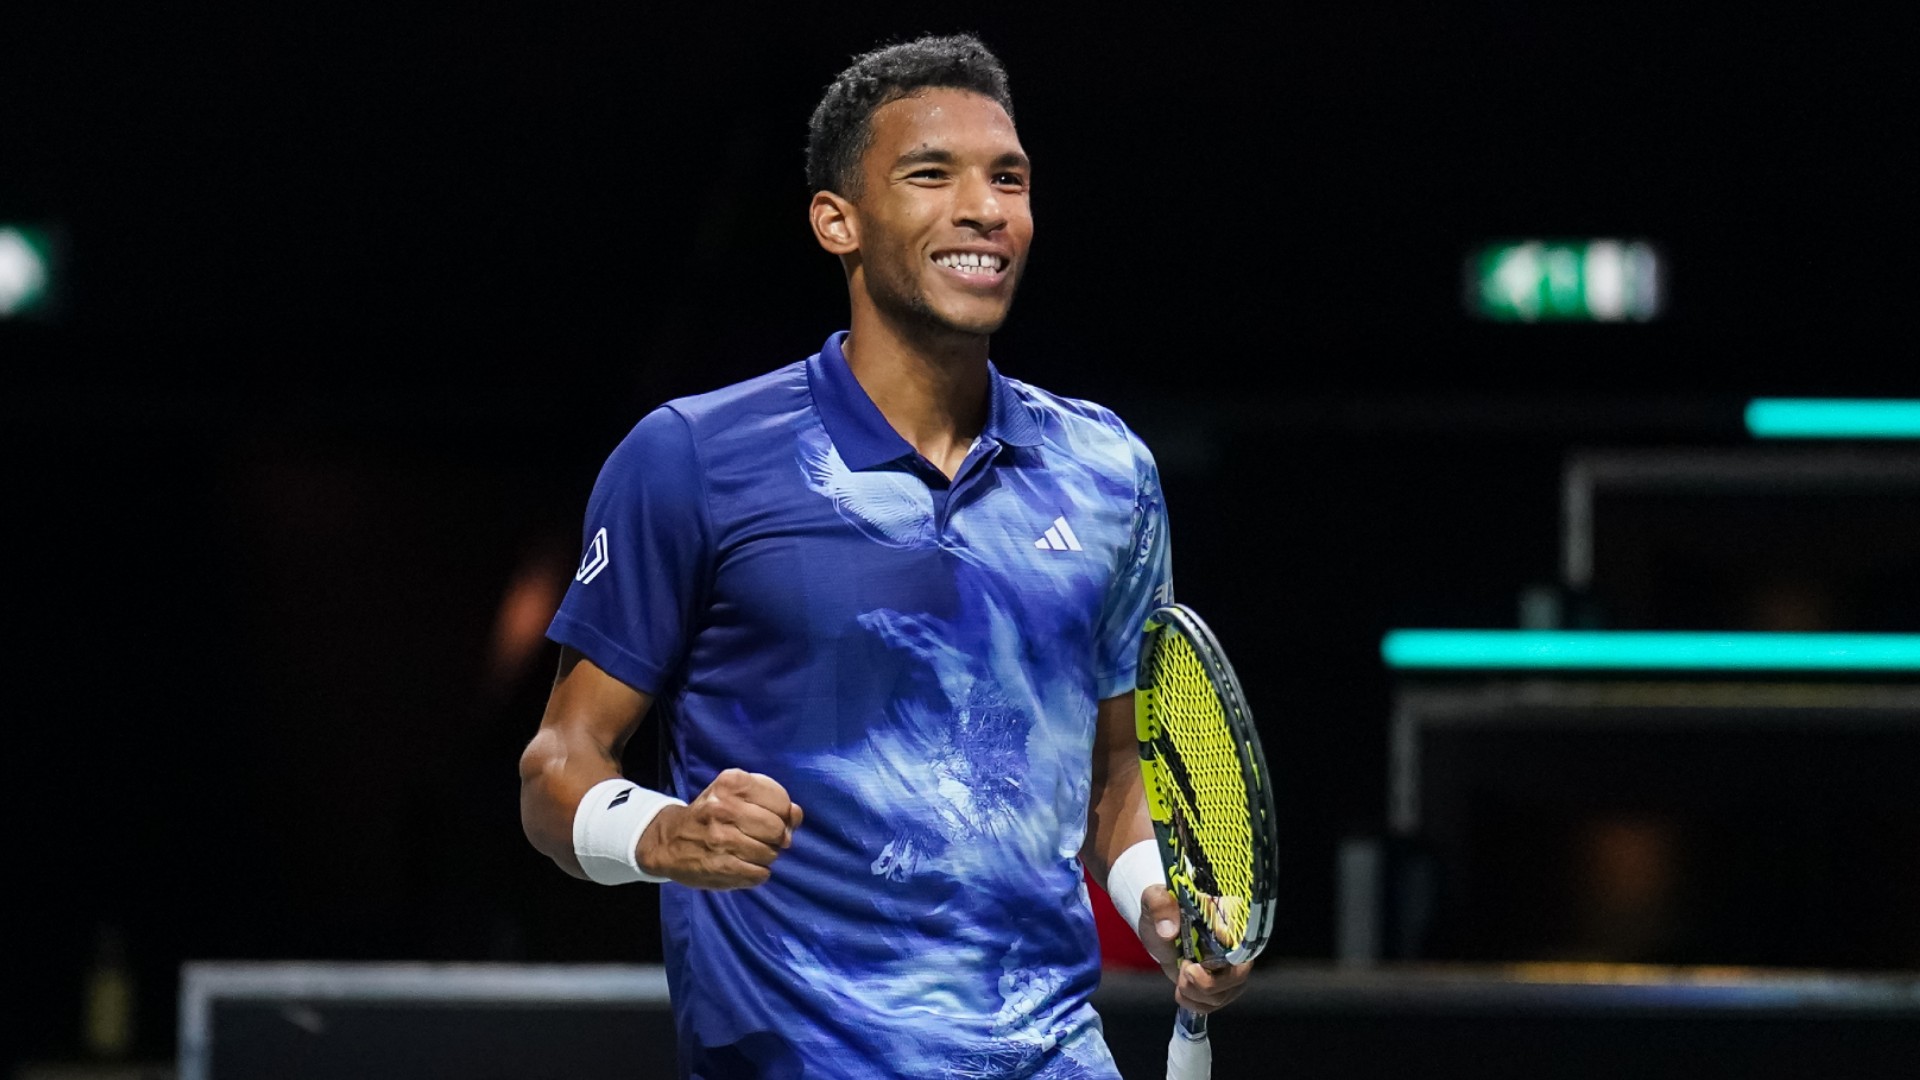 Reigning champion Auger-Aliassime leads seeds beIN SPORTS